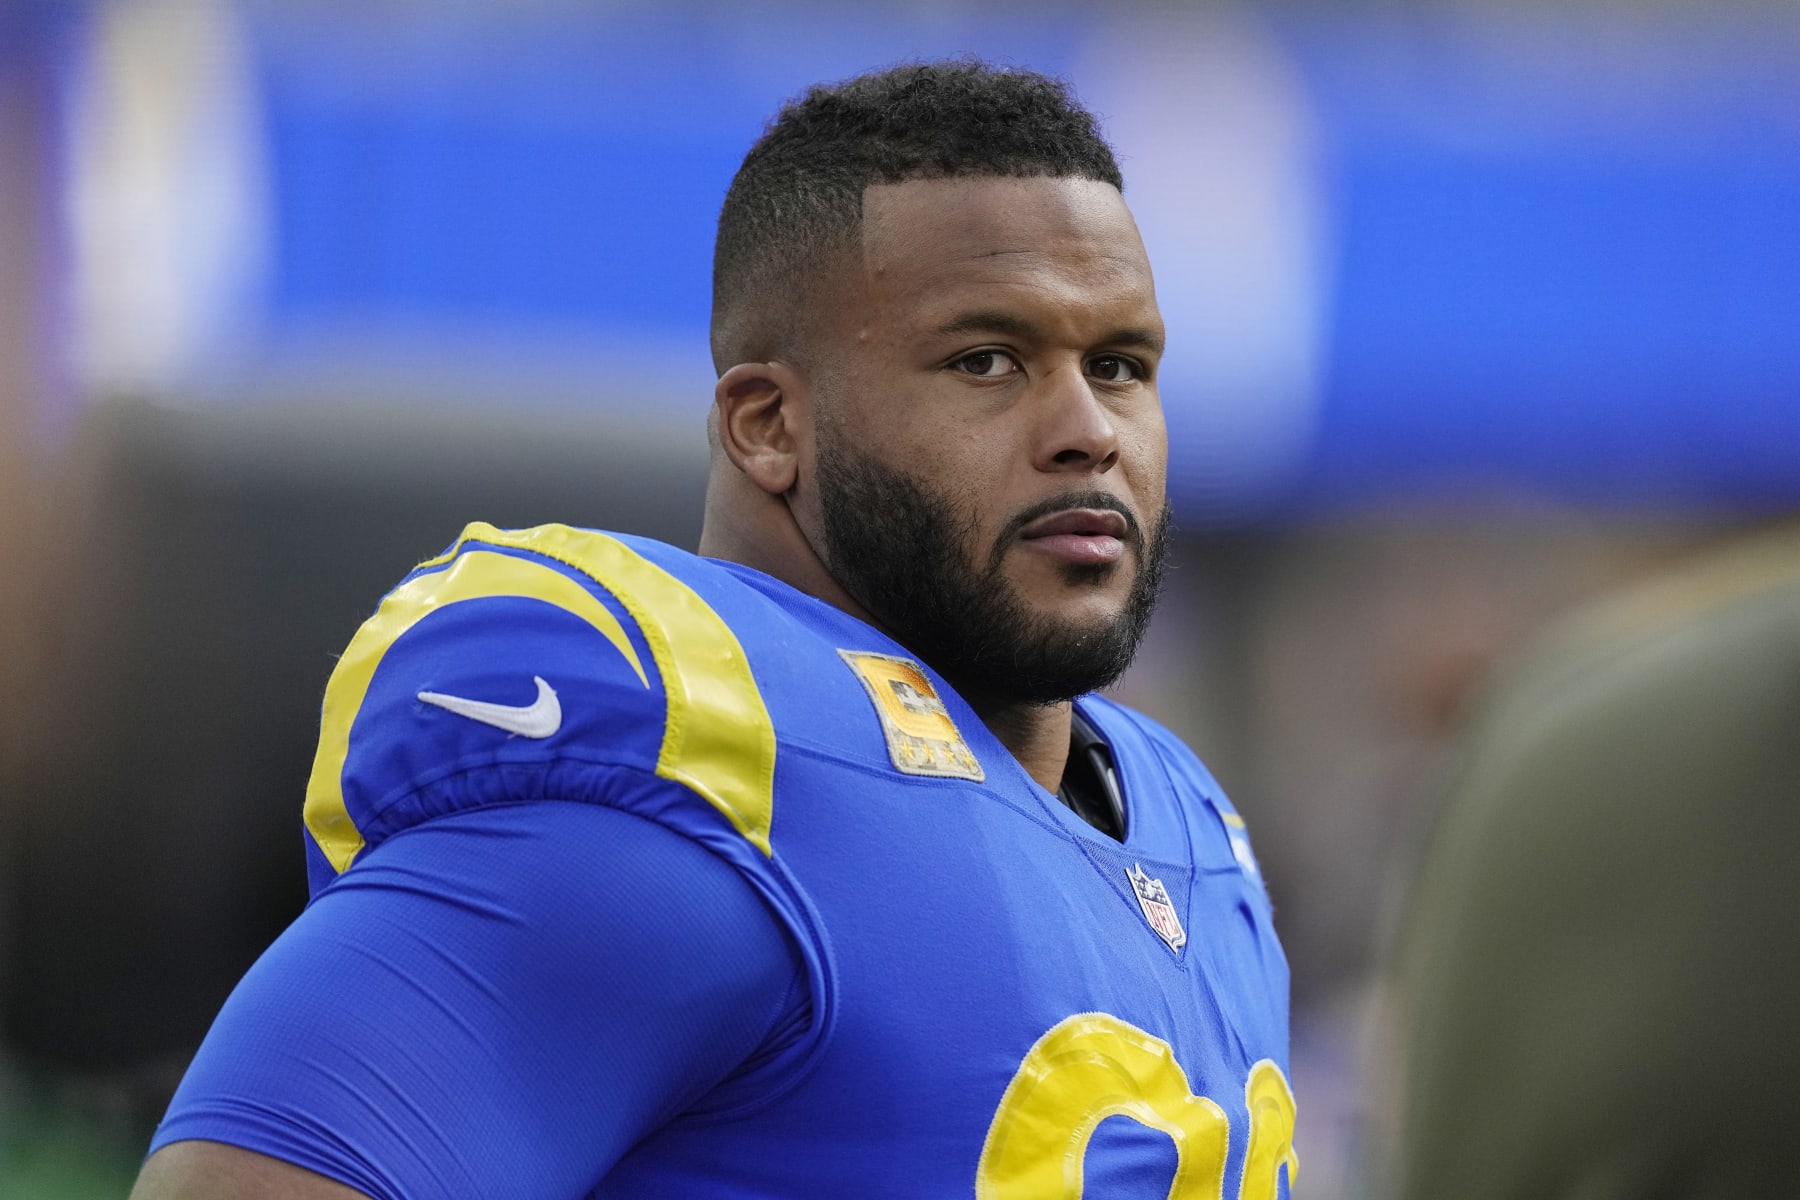 Aaron Donald says he'll be back for 2023 season amid retirement